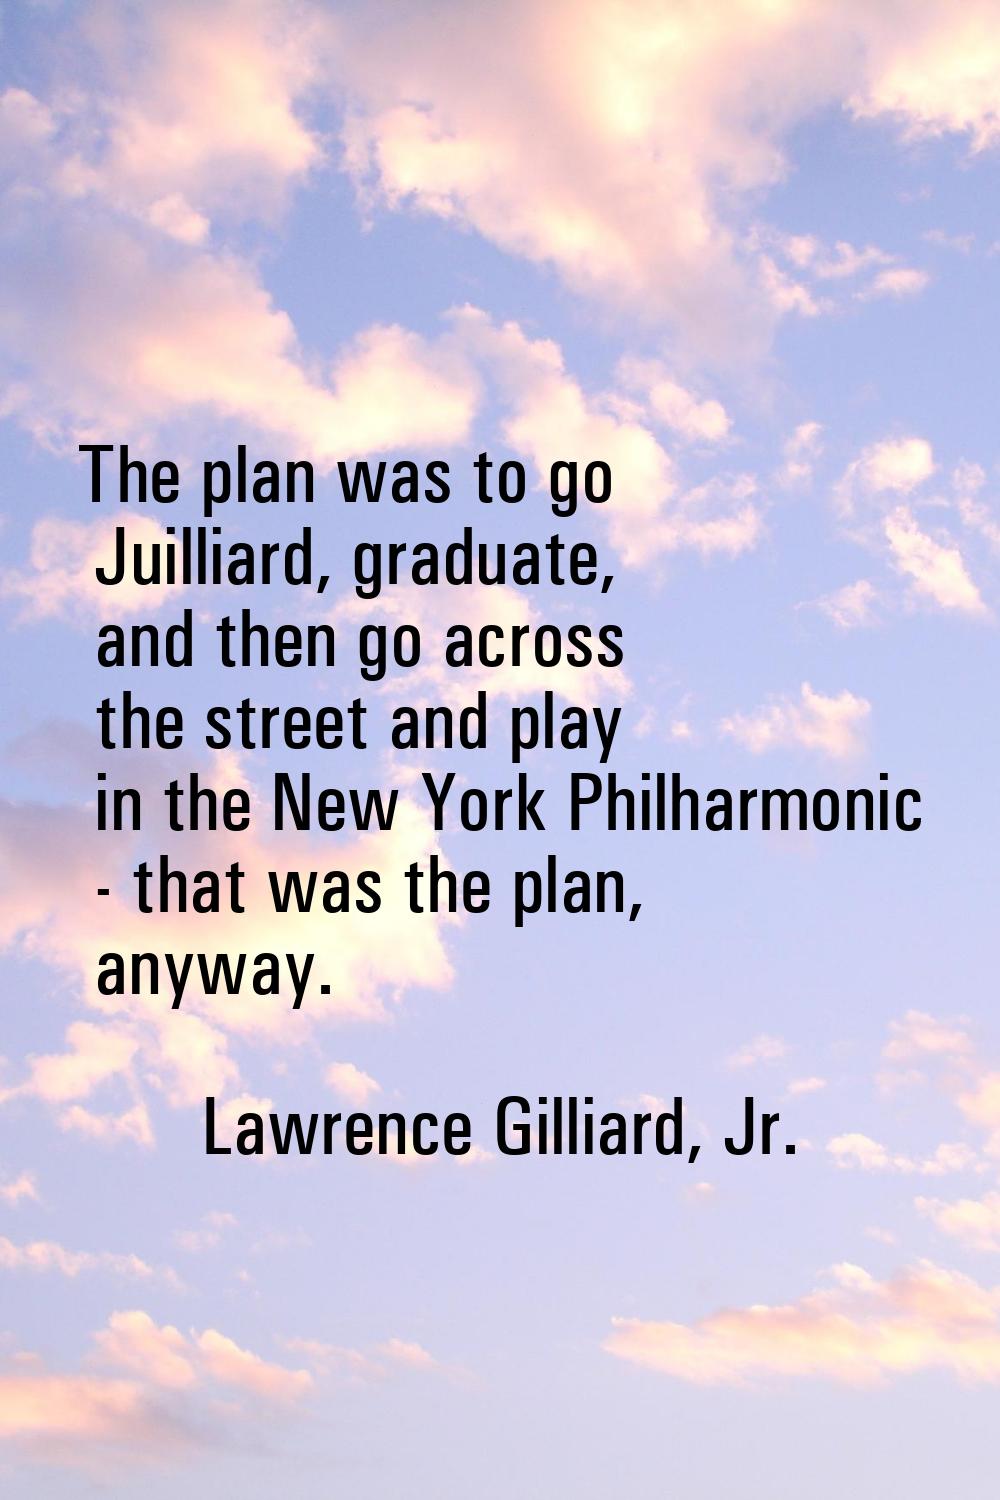 The plan was to go Juilliard, graduate, and then go across the street and play in the New York Phil